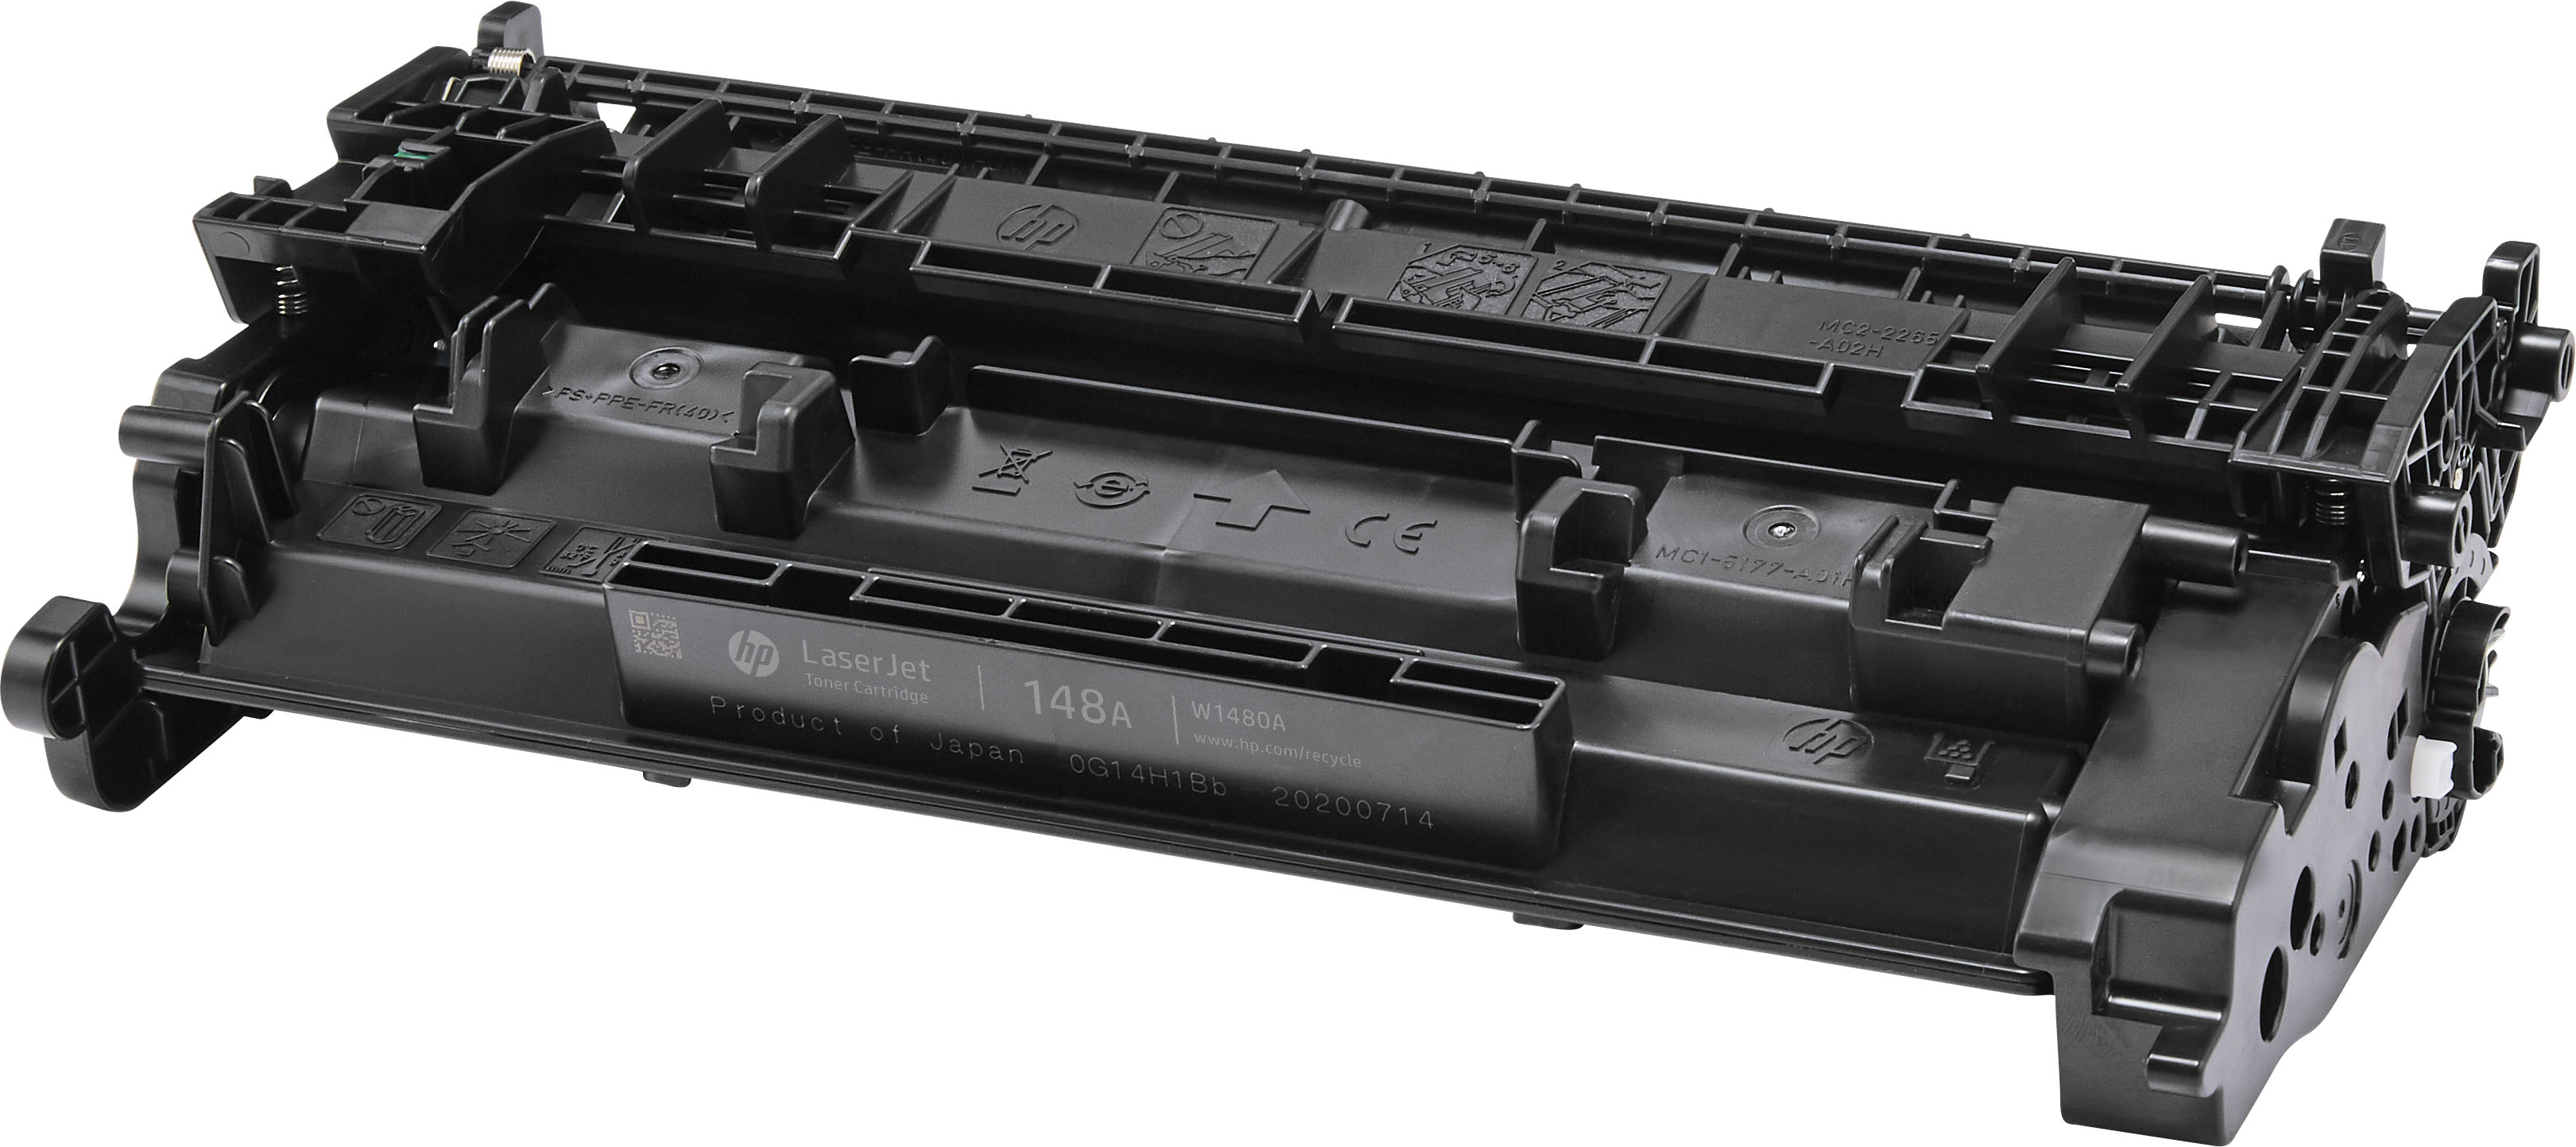  TOPRINT [NO CHIP with Tool] Compatible Toner Cartridge 148X  W1480X ( 148A W1480A ) High Capacity for H P Laserjet Pro 4001 4001n 4001dn  4001dw, MFP 4101 4101fdn 4101fdw Printer : Office Products